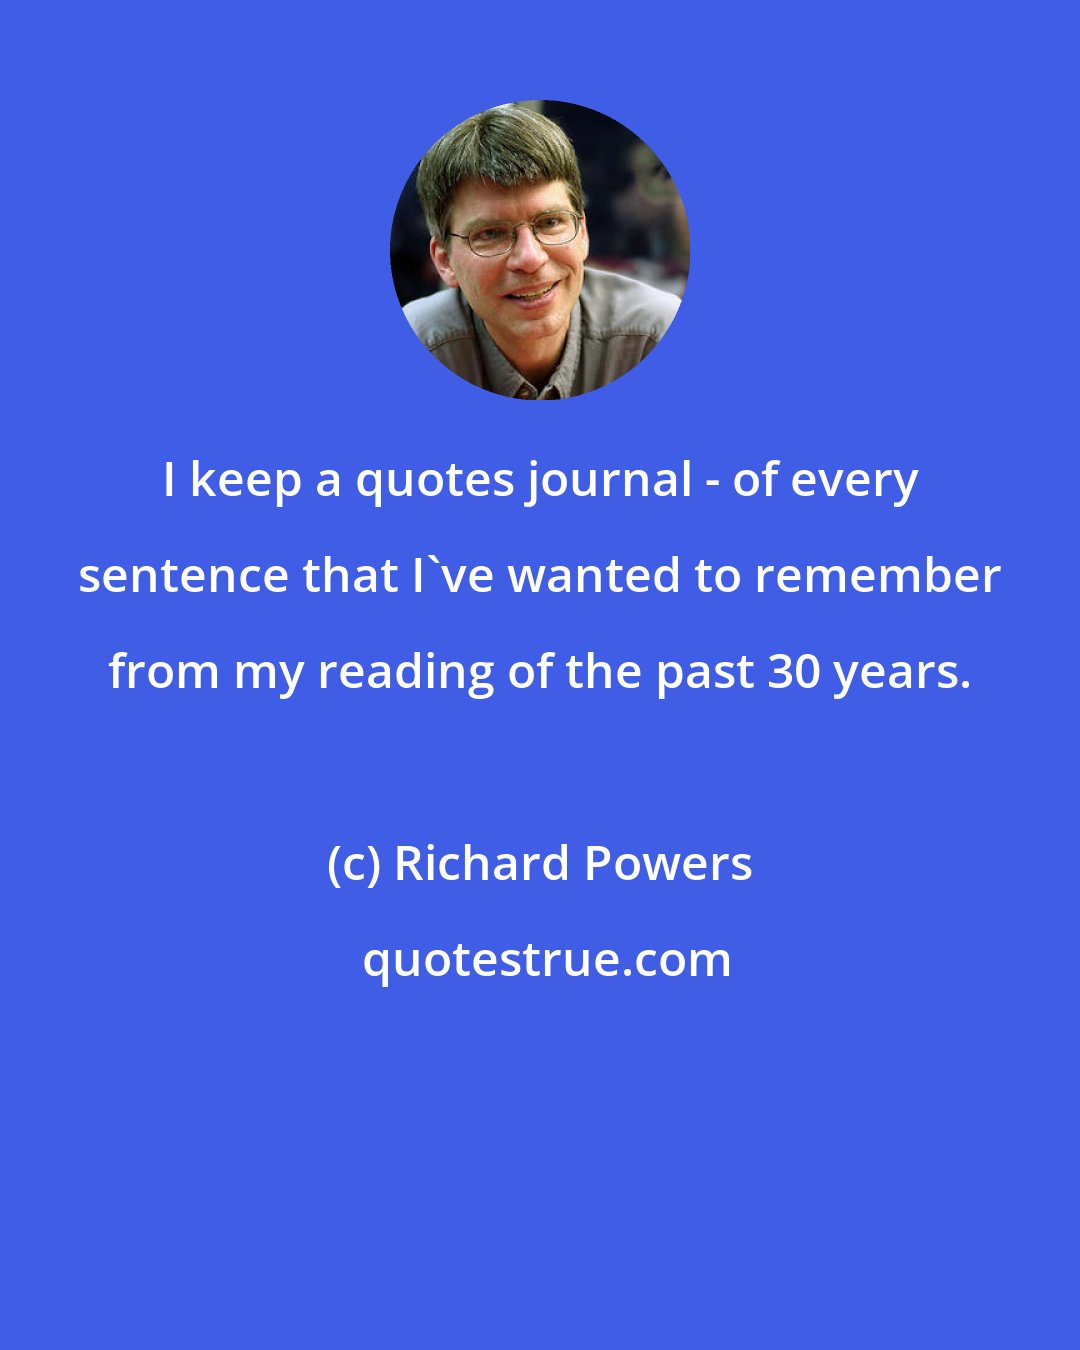 Richard Powers: I keep a quotes journal - of every sentence that I've wanted to remember from my reading of the past 30 years.